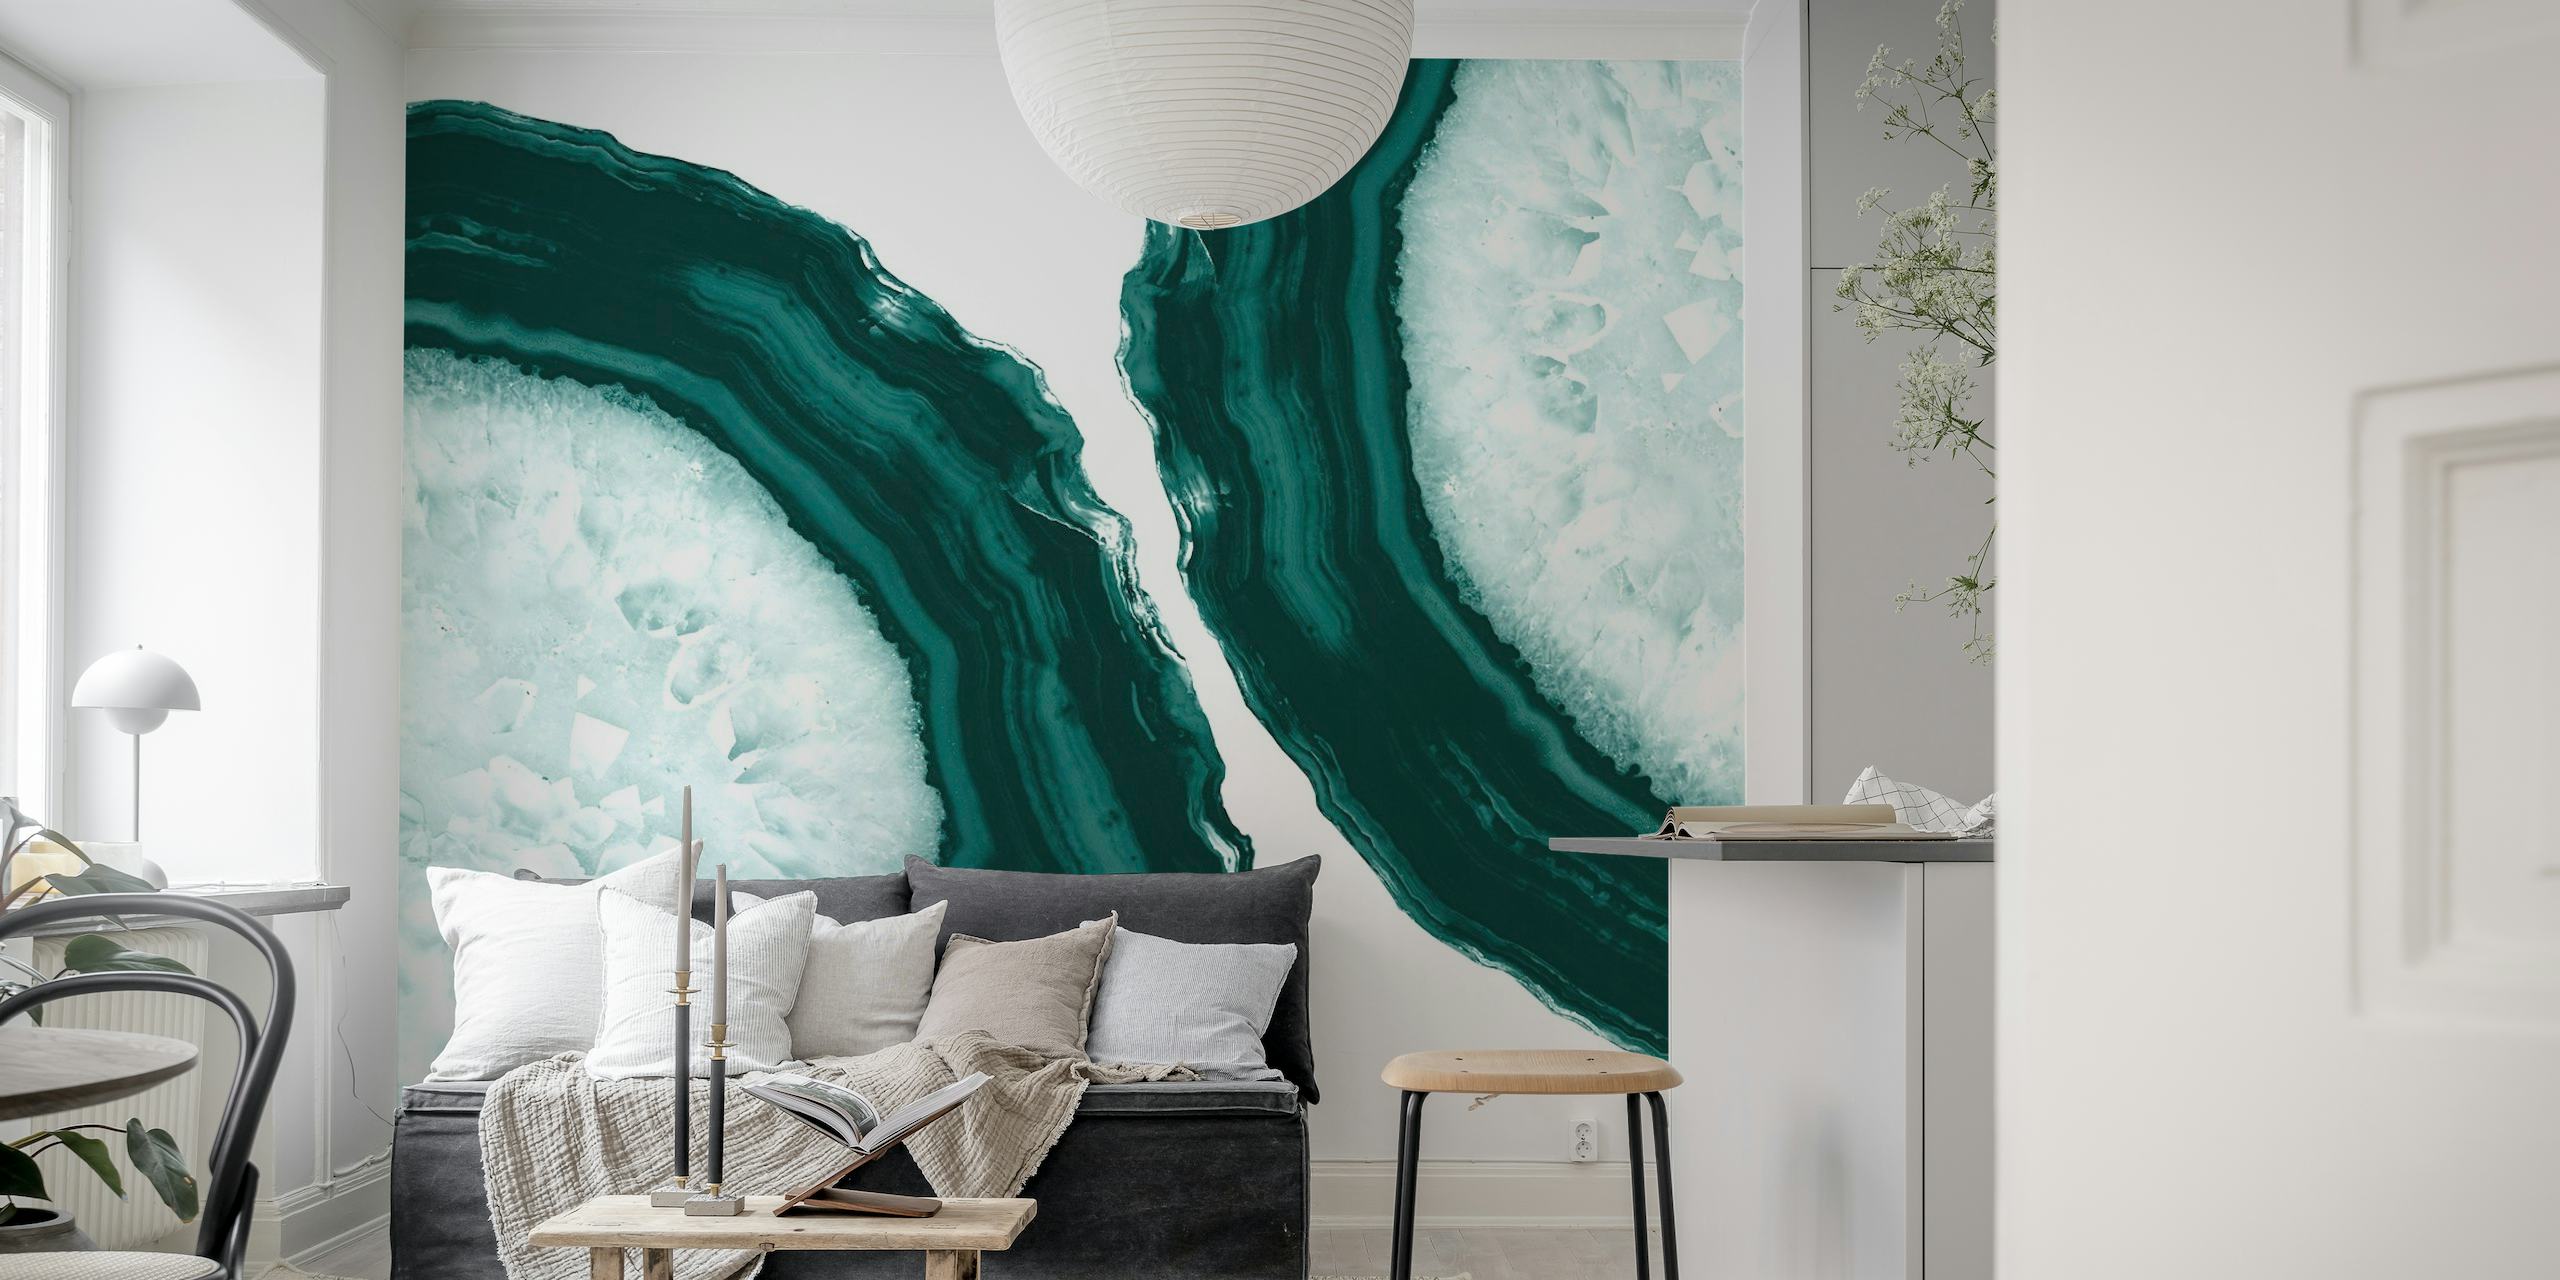 Teal Agate Glam 4 wall mural depicting the intricate patterns and rich colors of agate stones.